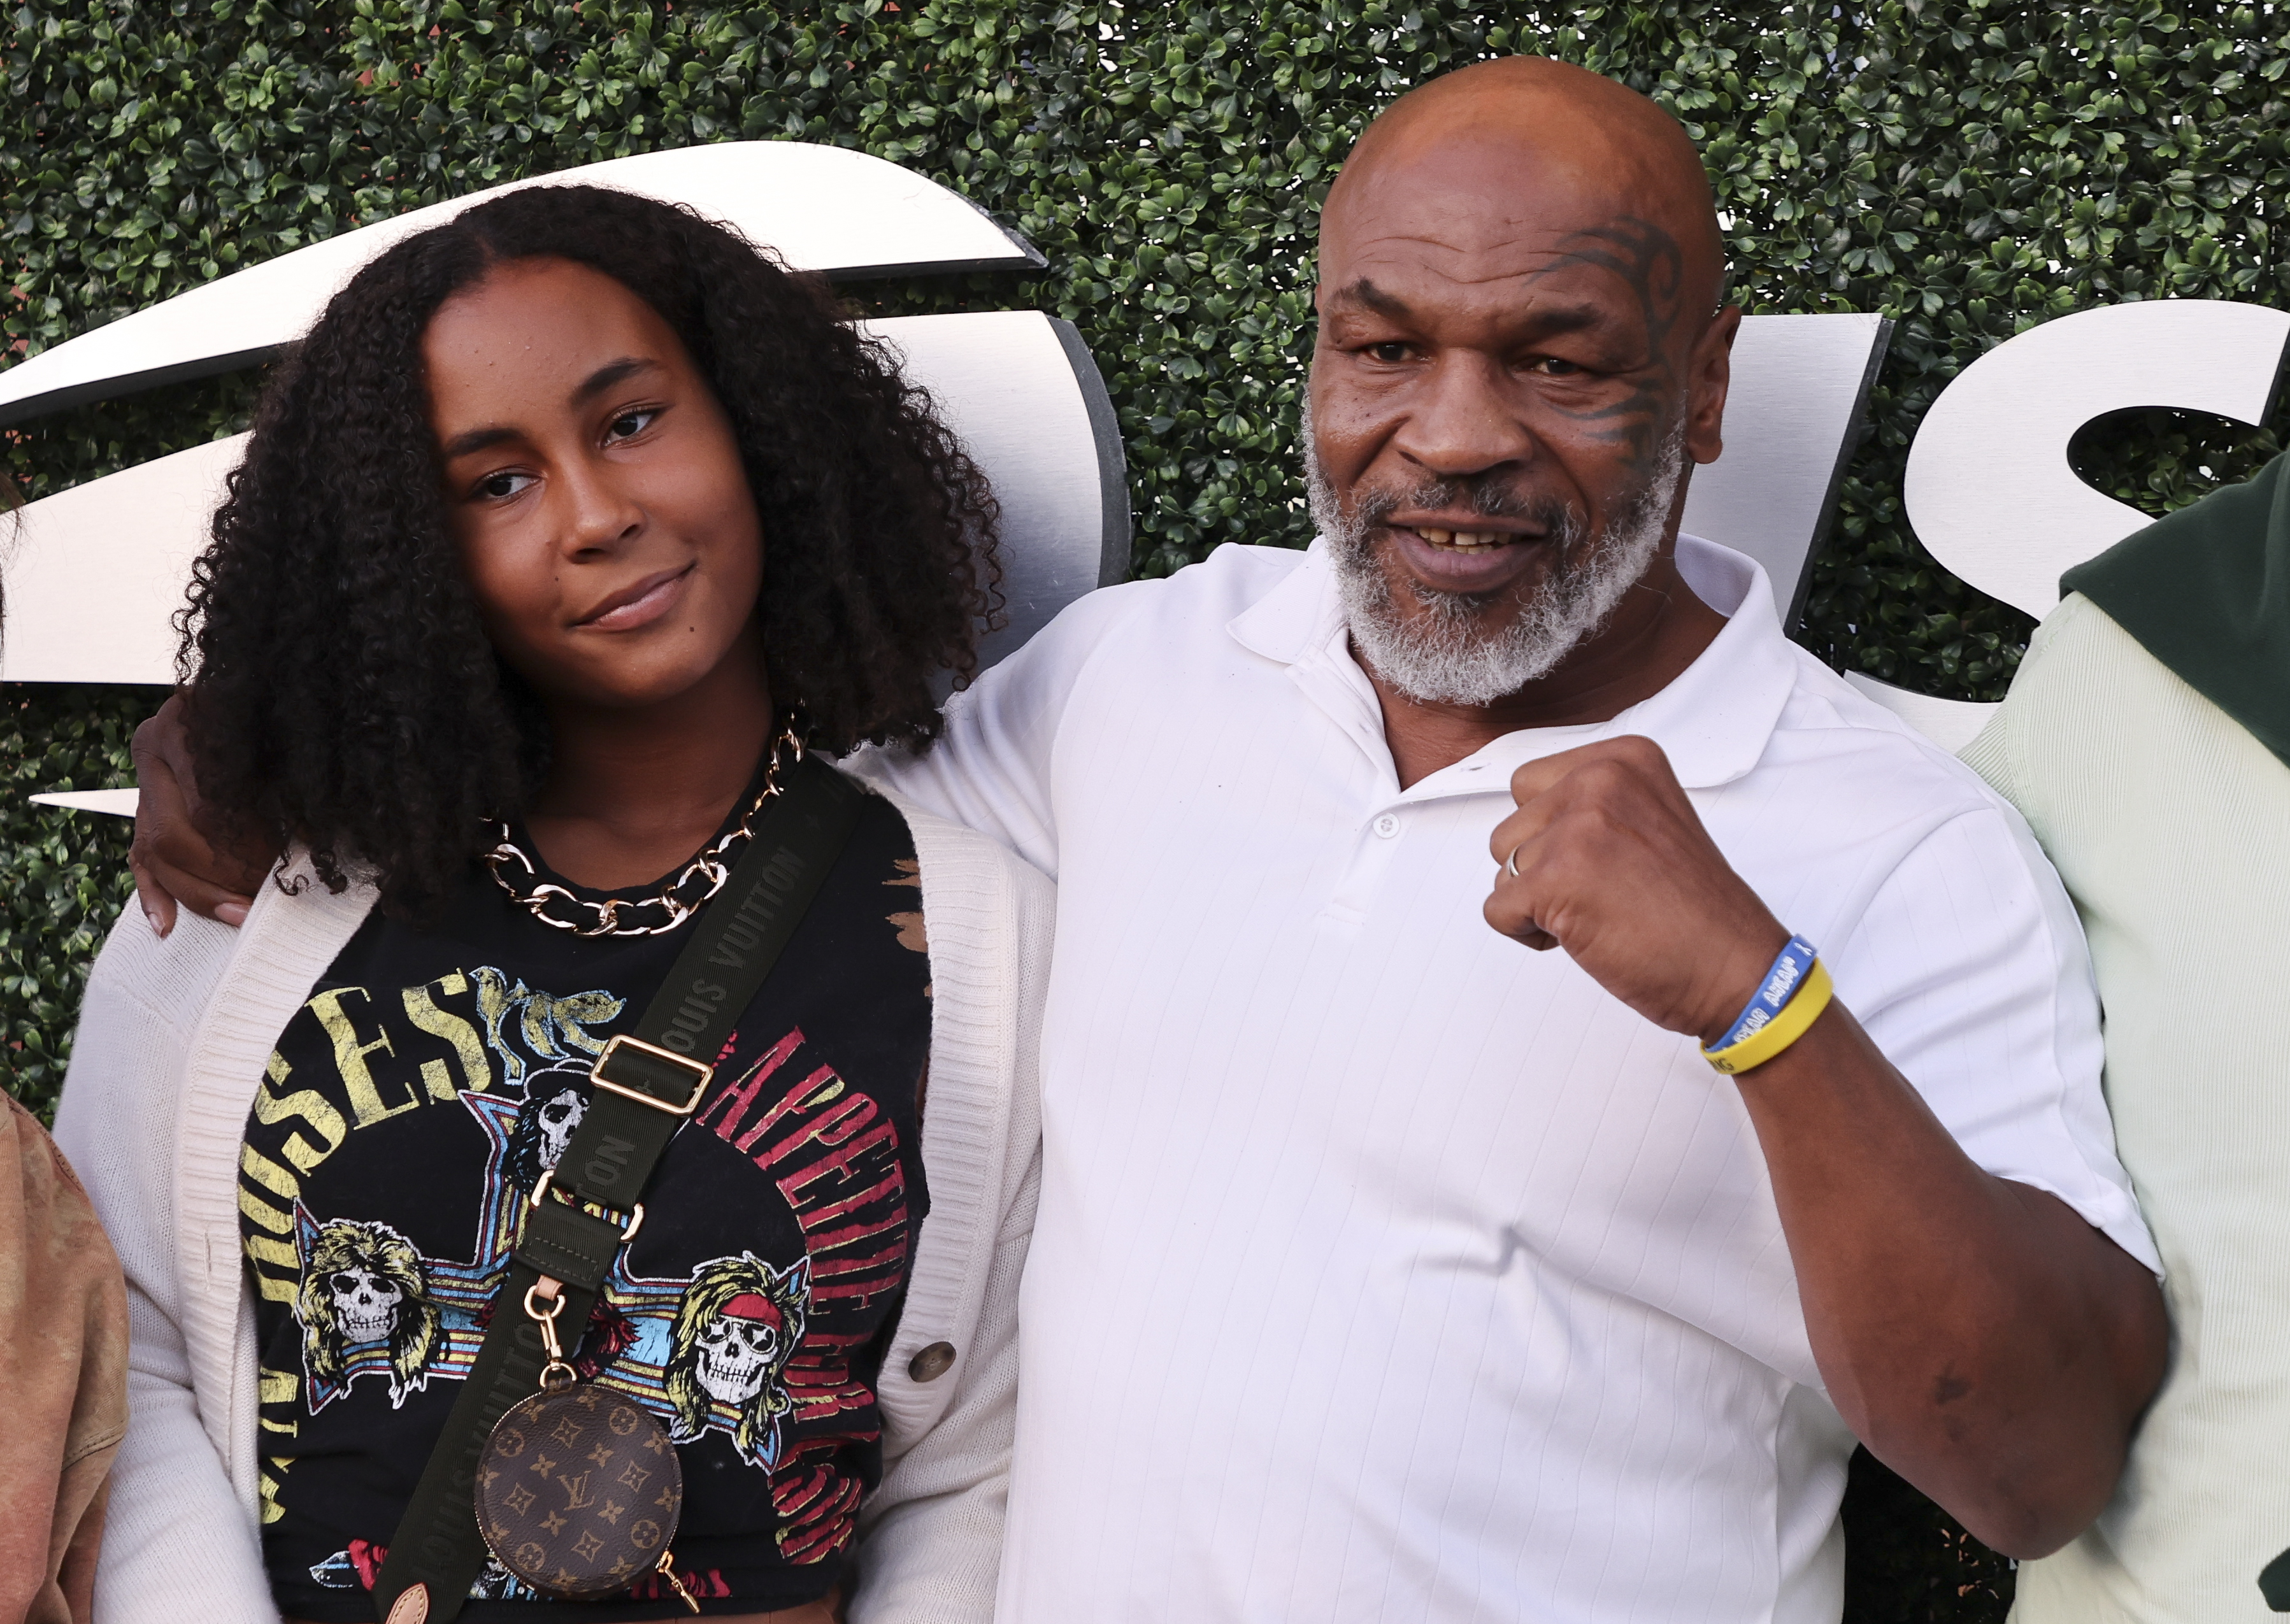 Mike Tyson and his daughter Milan Tyson at Serena Williams' match at Arthur Ashe Stadium during Day 5 of the US Open 2022, in Queens, New York City | Source: Getty Images